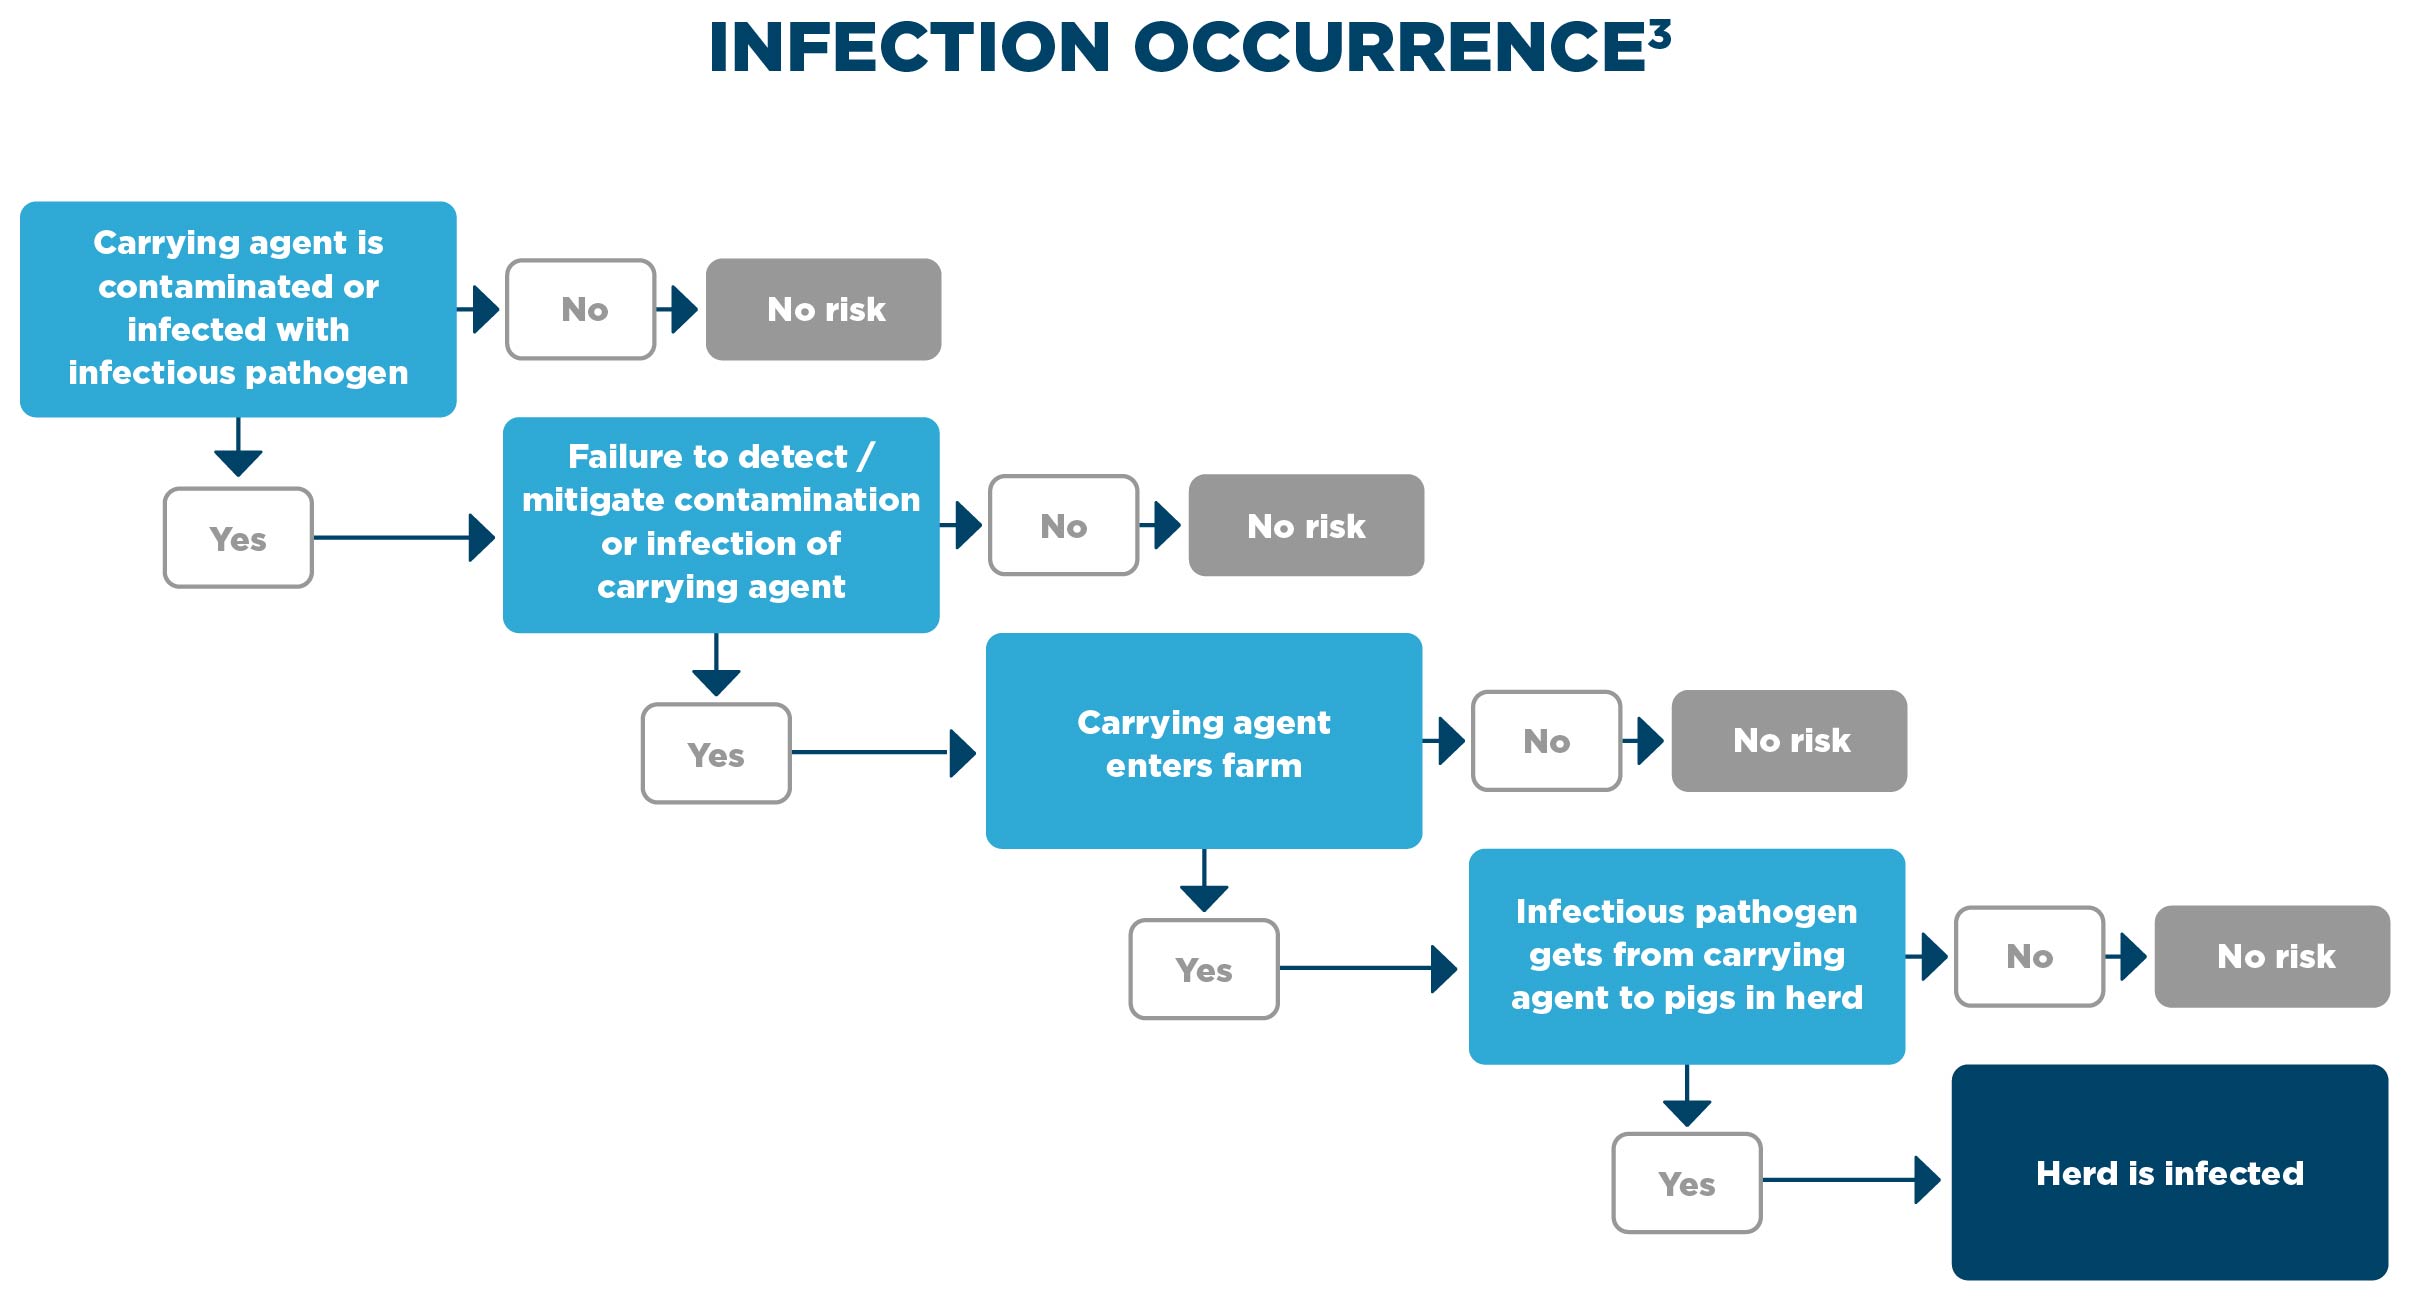 INFECTION OCCURRENCE